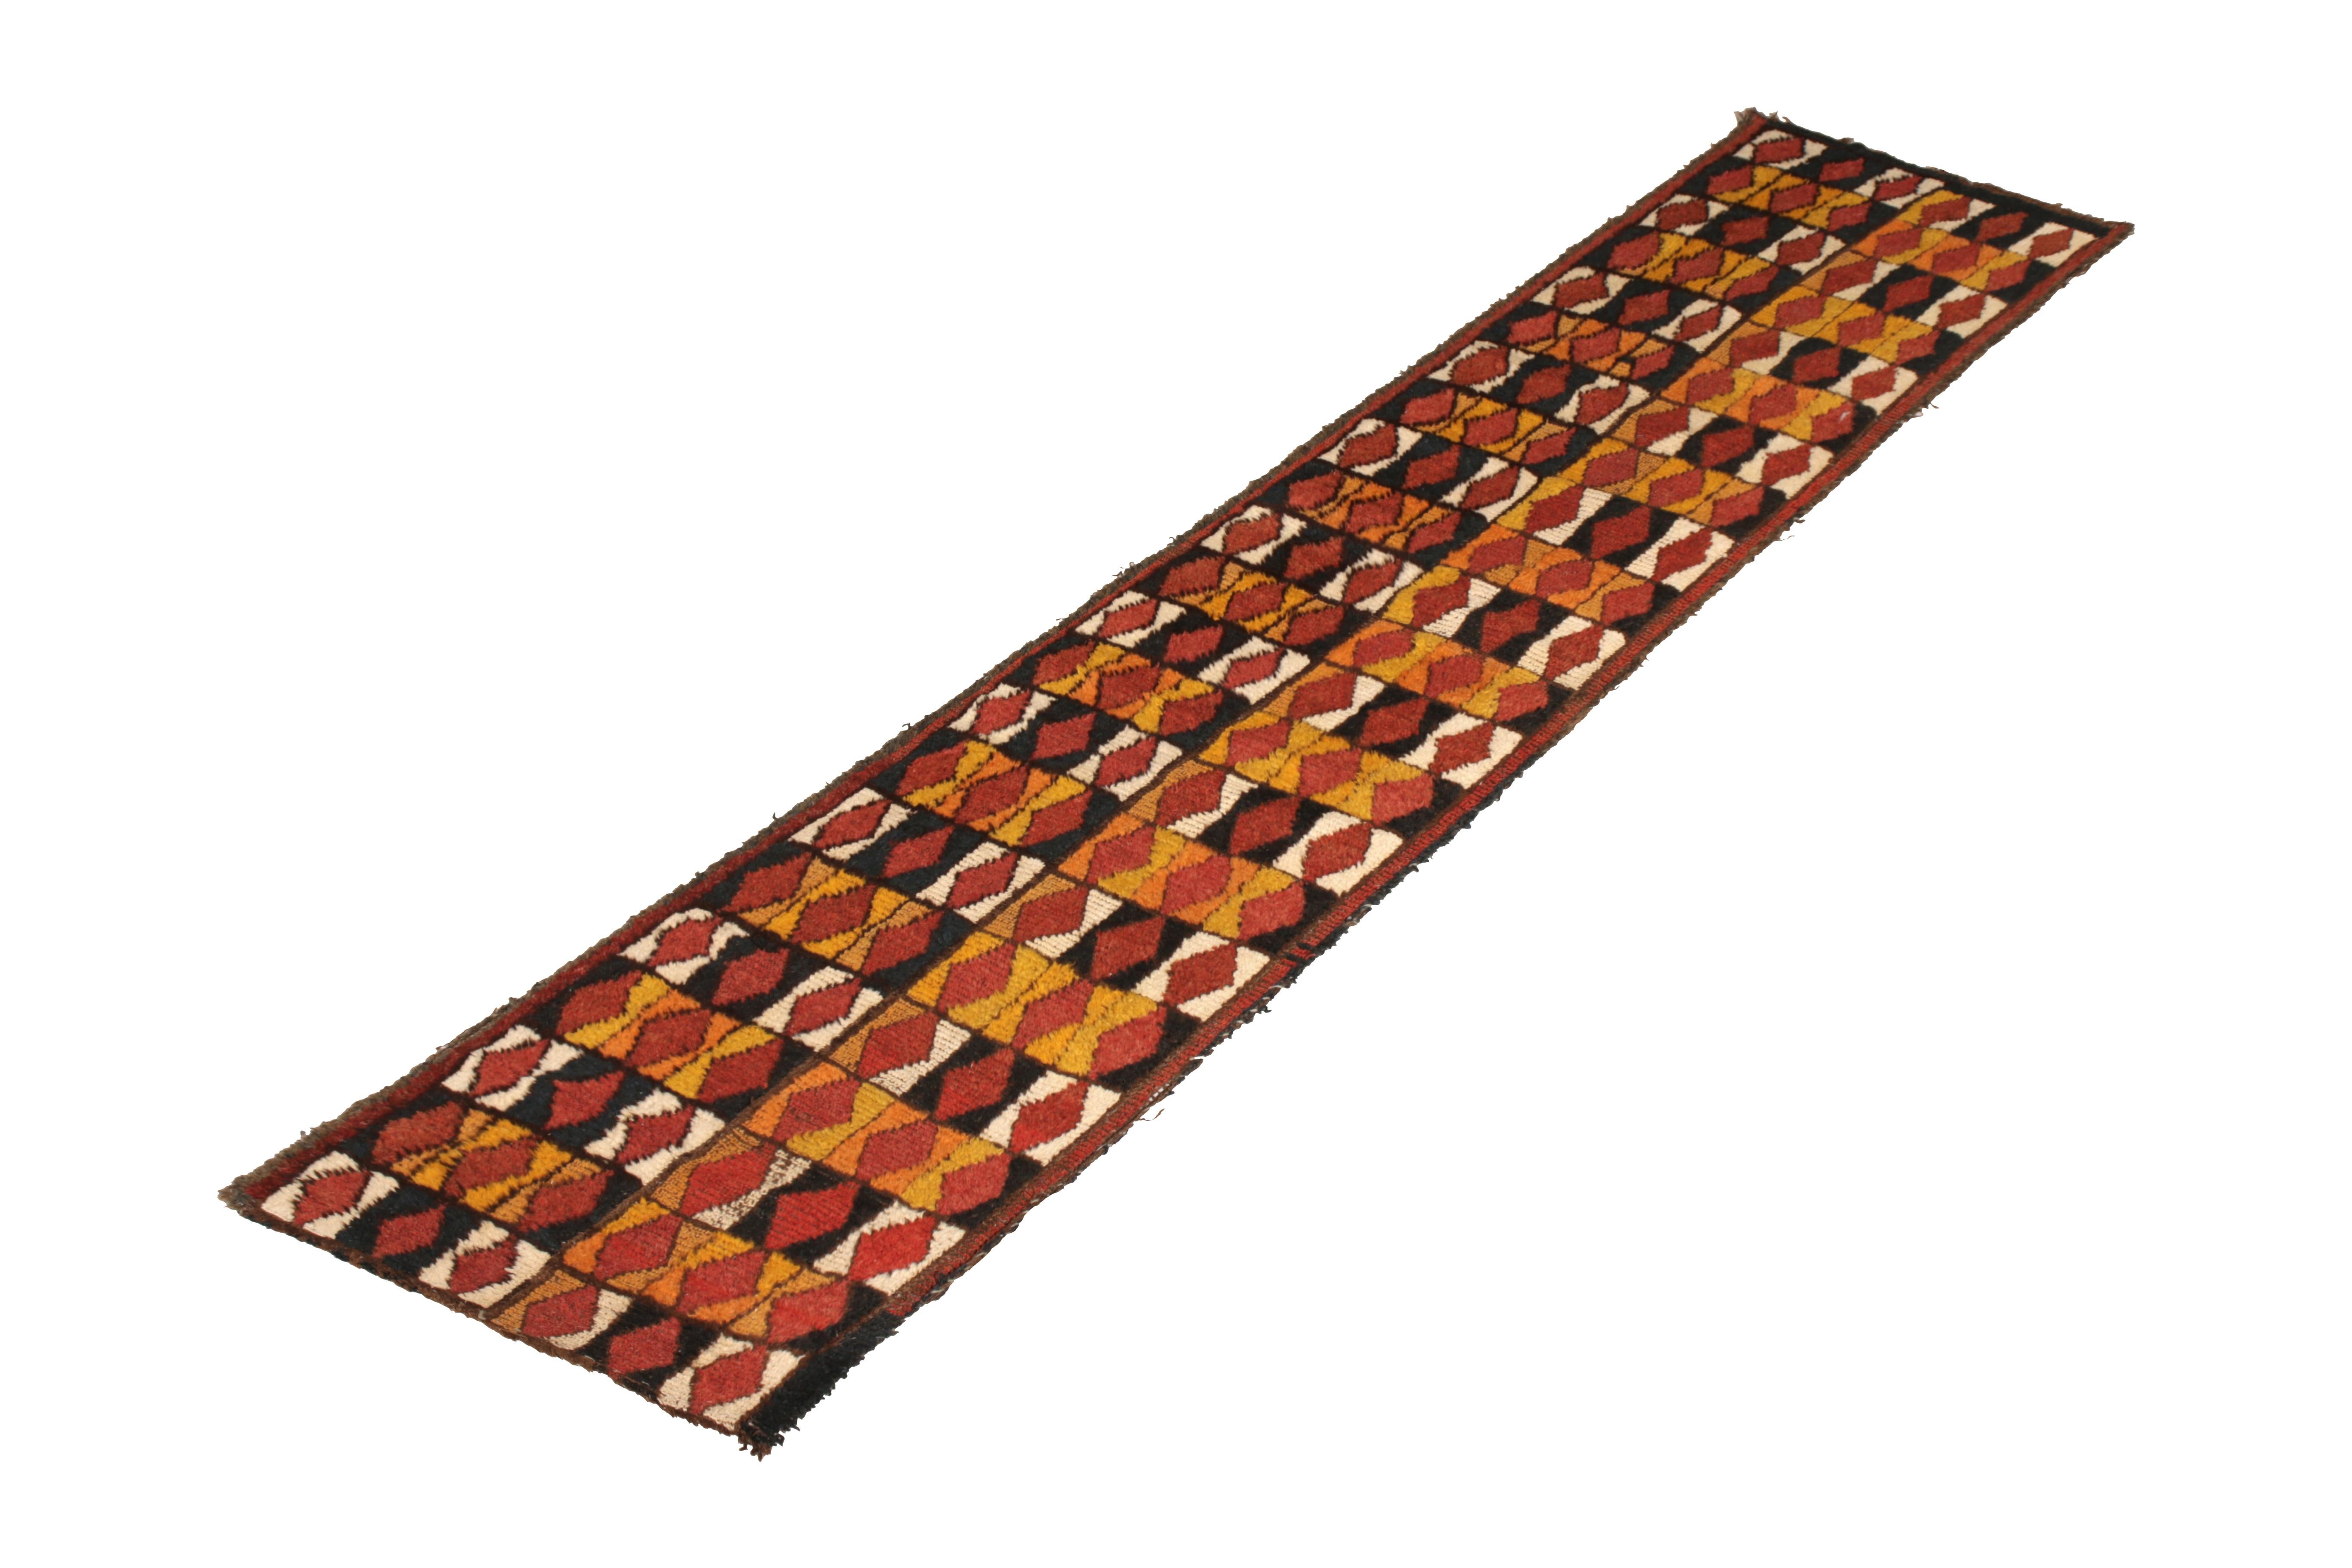 A rare vintage rug originating from Iraq, this midcentury runner features a geometric pattern inspired by Moroccan style rug patterns. Hand knotted, circa 1950-1960 comprising wool in beige, orange, red, black, brown, and yellow, this particular